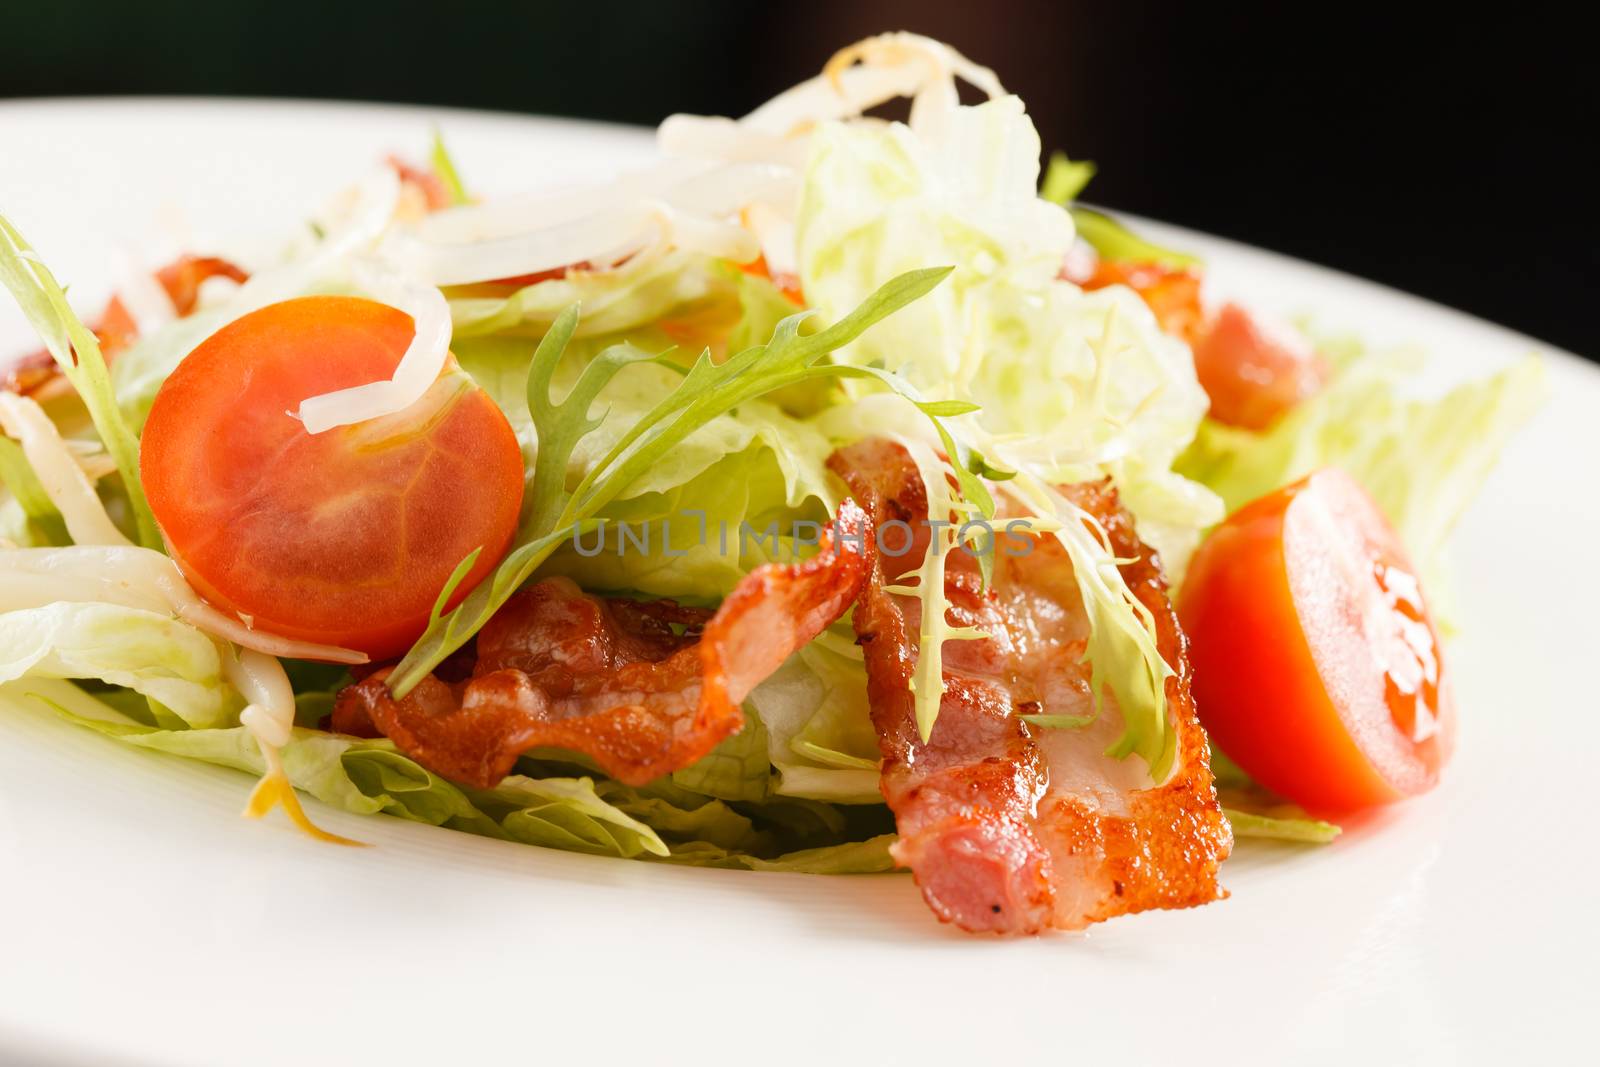 salad with bacon by shebeko